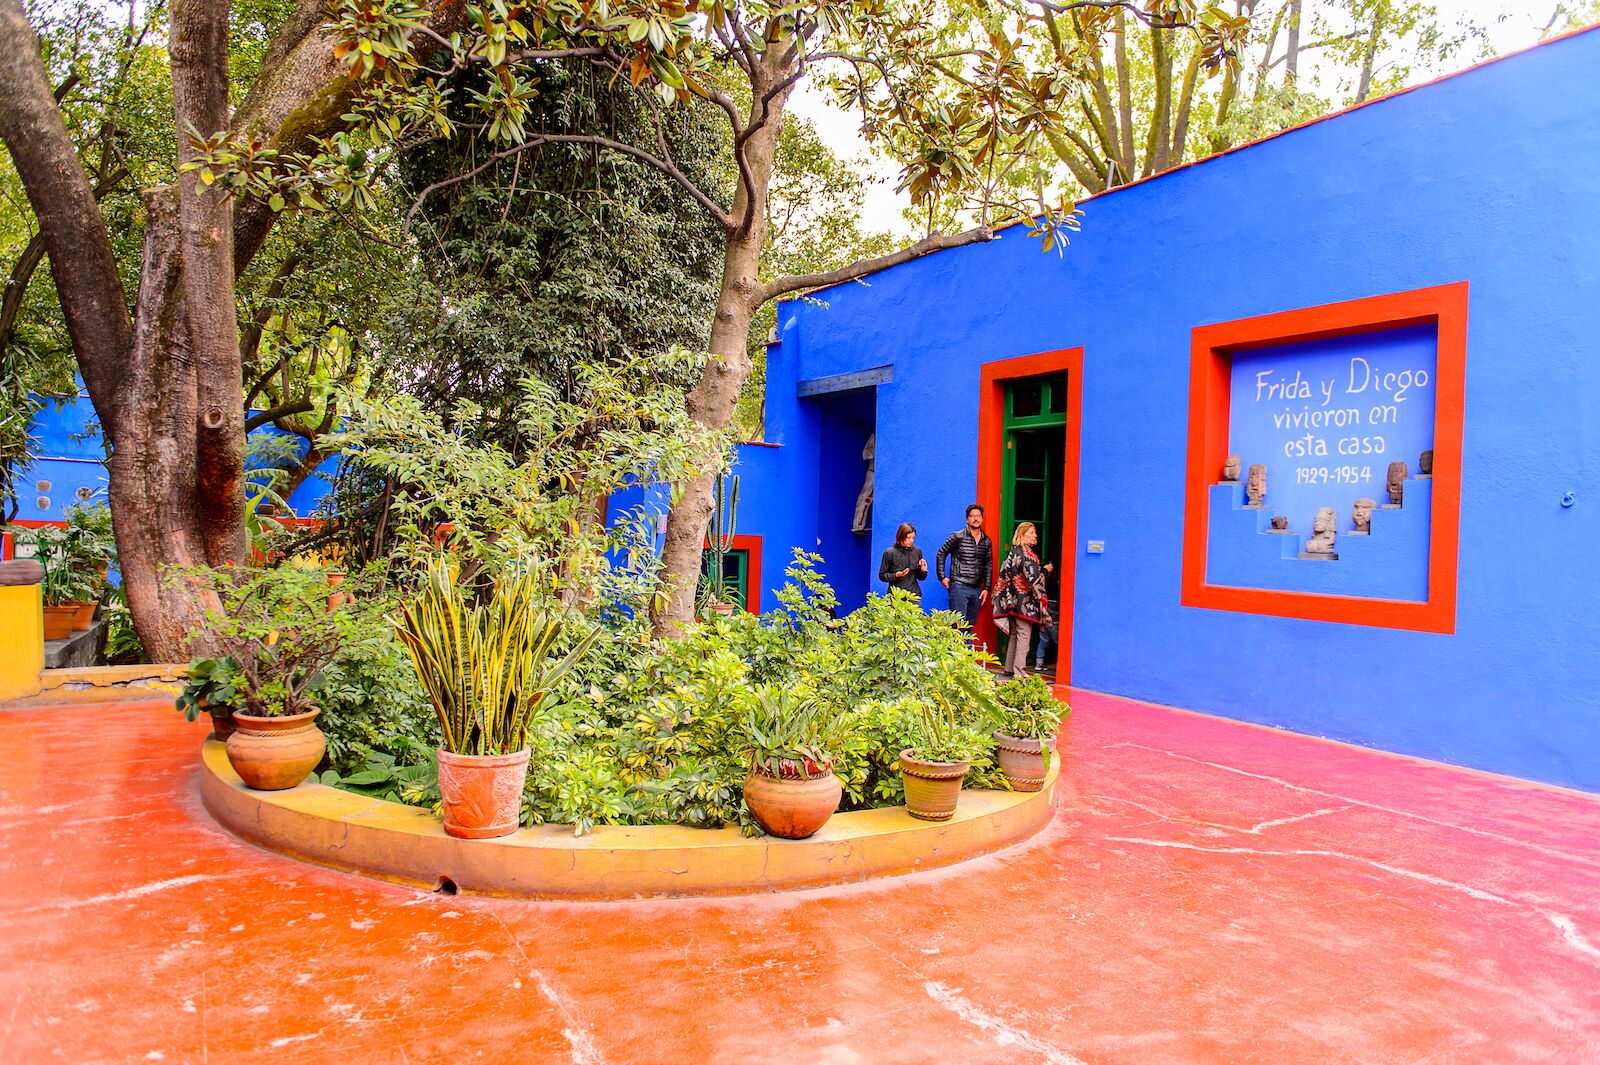 Courtyard at the Frida Kahlo Museum in Mexico City